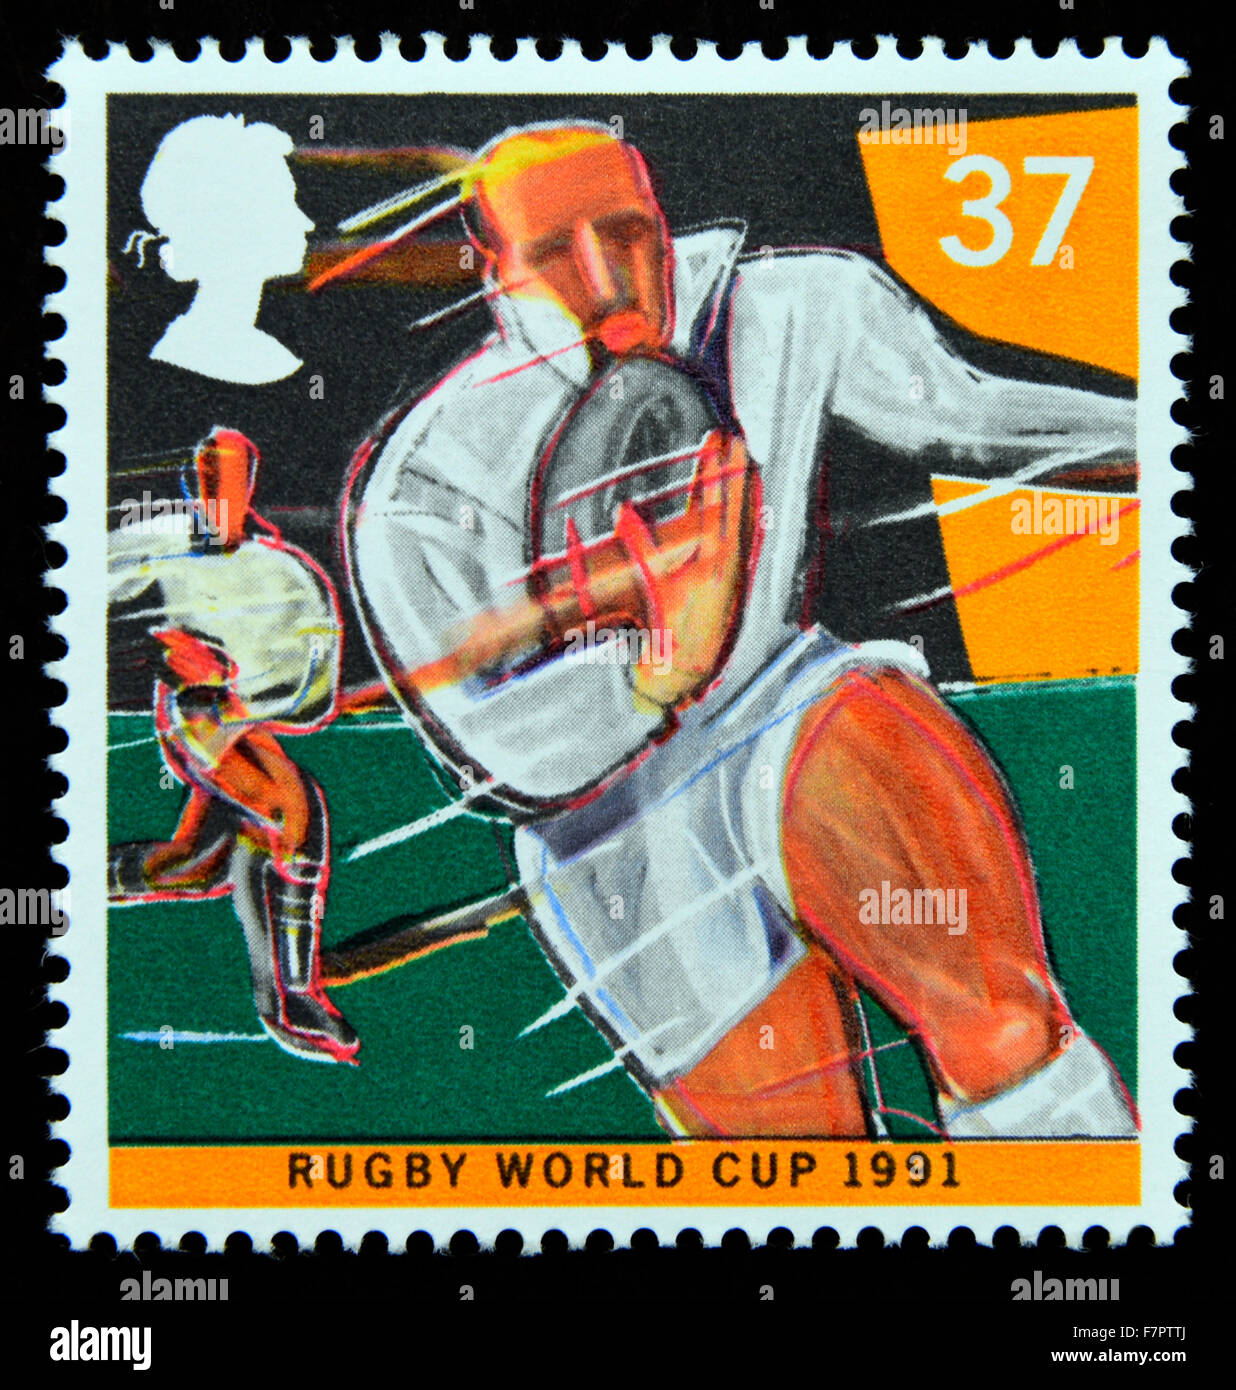 Postage stamp. Great Britain. Queen Elizabeth II. 1991. World Cup Rugby Championship, London. 37p. Stock Photo